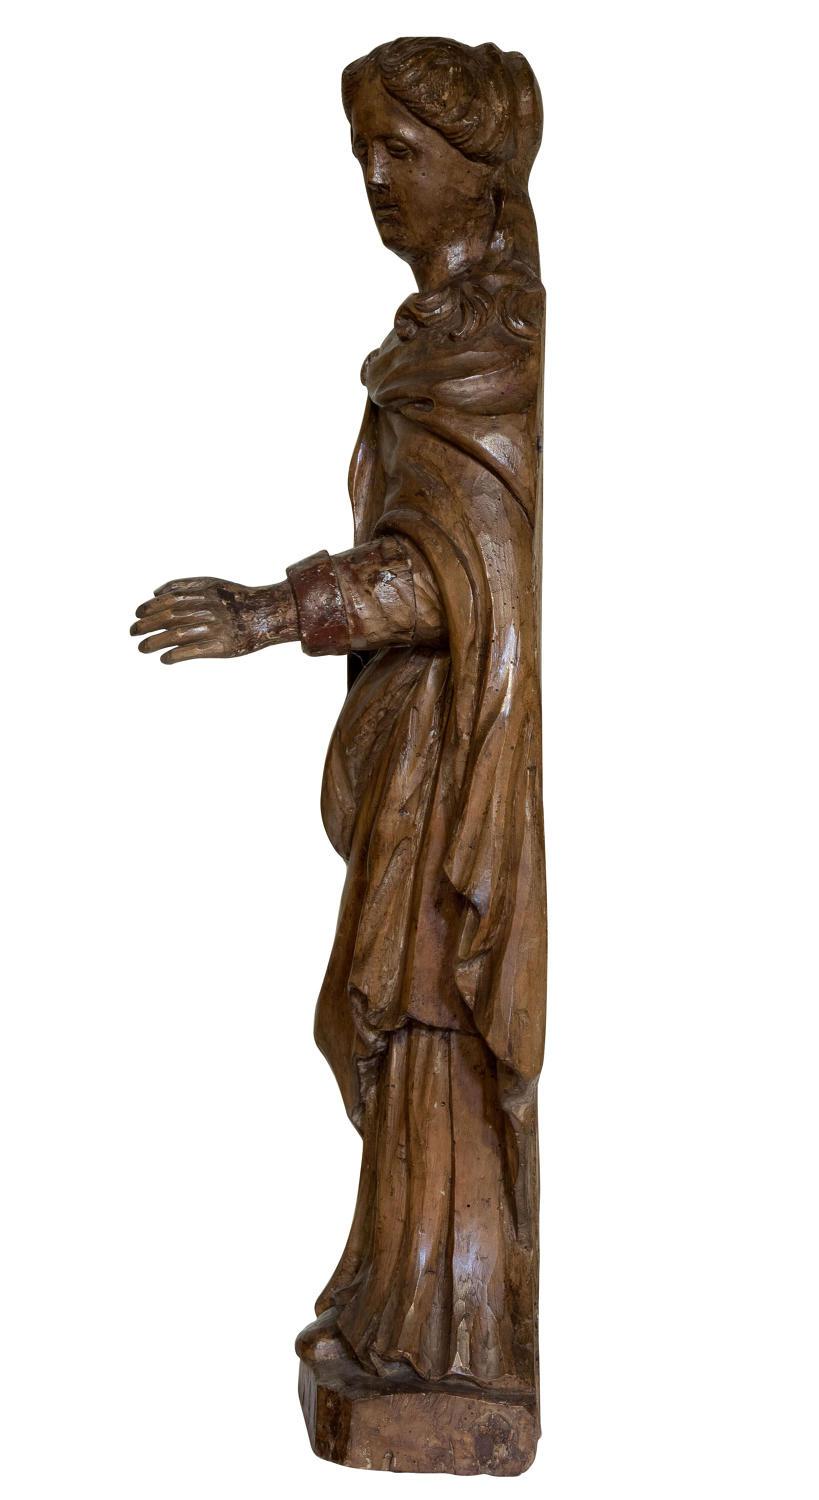 Carved limewood figure of St. Catherine of Alexandria, possibly German,

17th century.